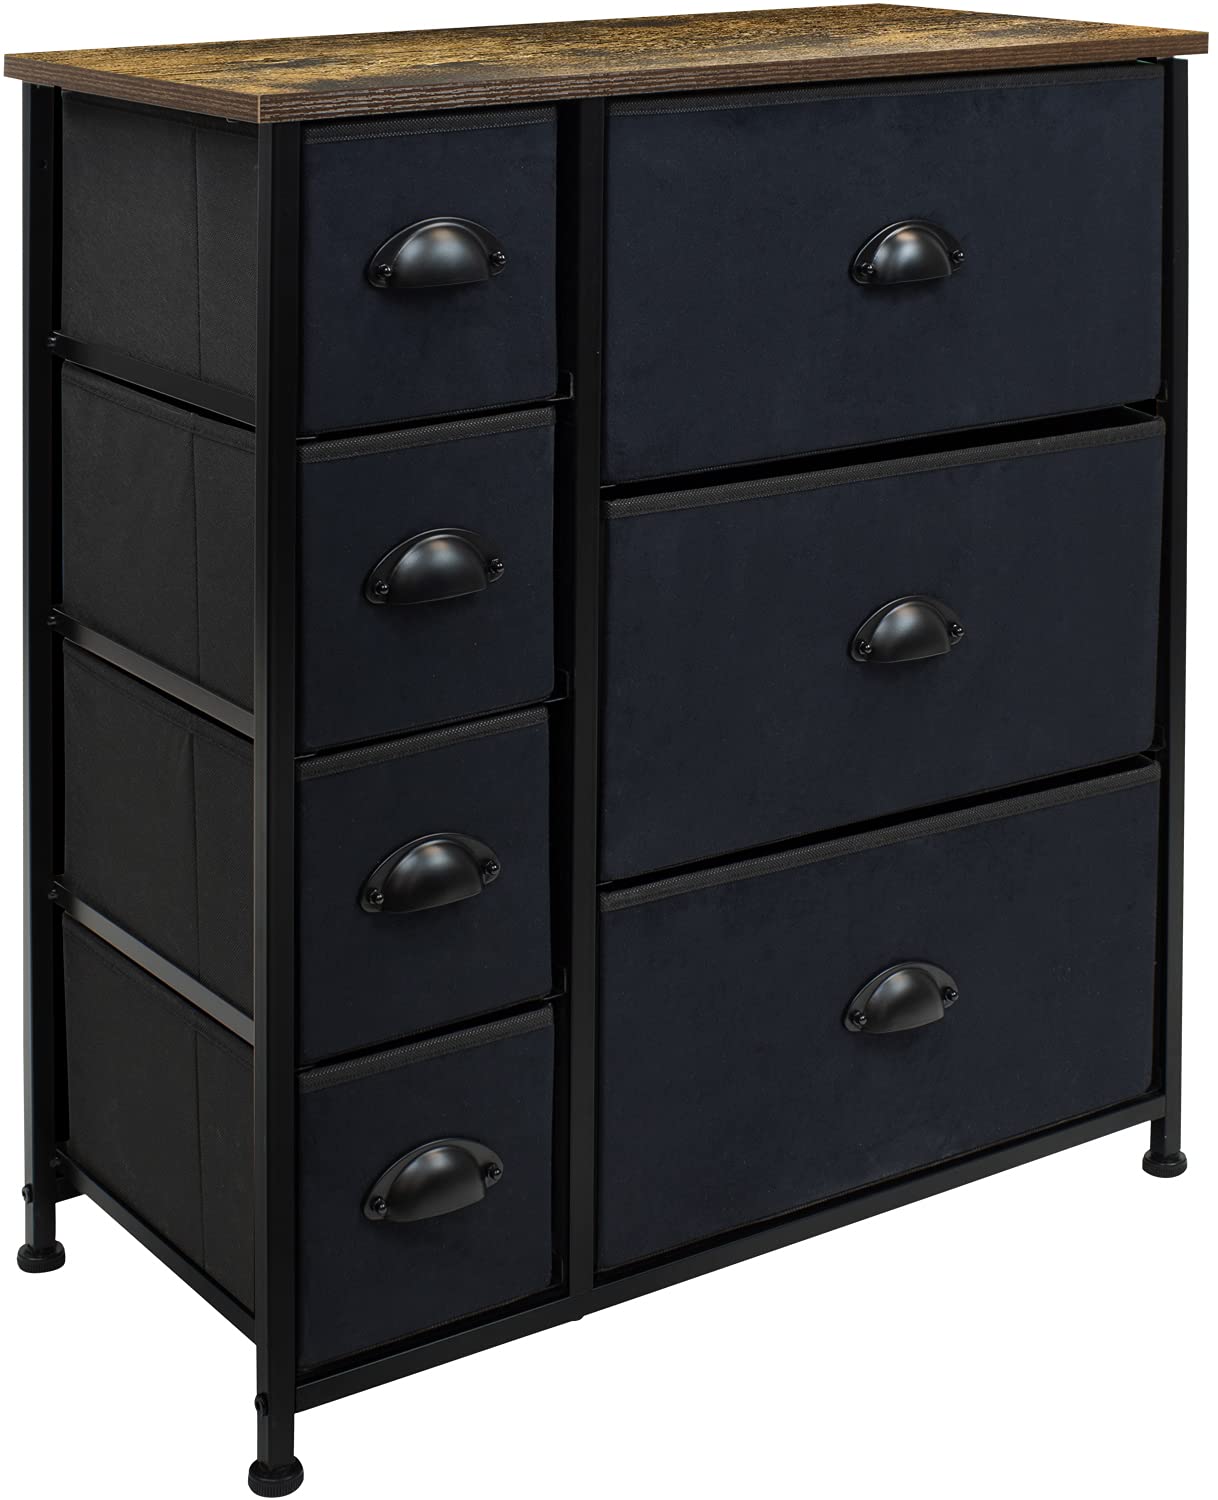 Sorbus Dresser with Drawers - Furniture Storage Tower Unit for Bedroom, Hallway, Closet, Office Organization - Steel Frame, Wood Top, Easy Pull Fabric Bins